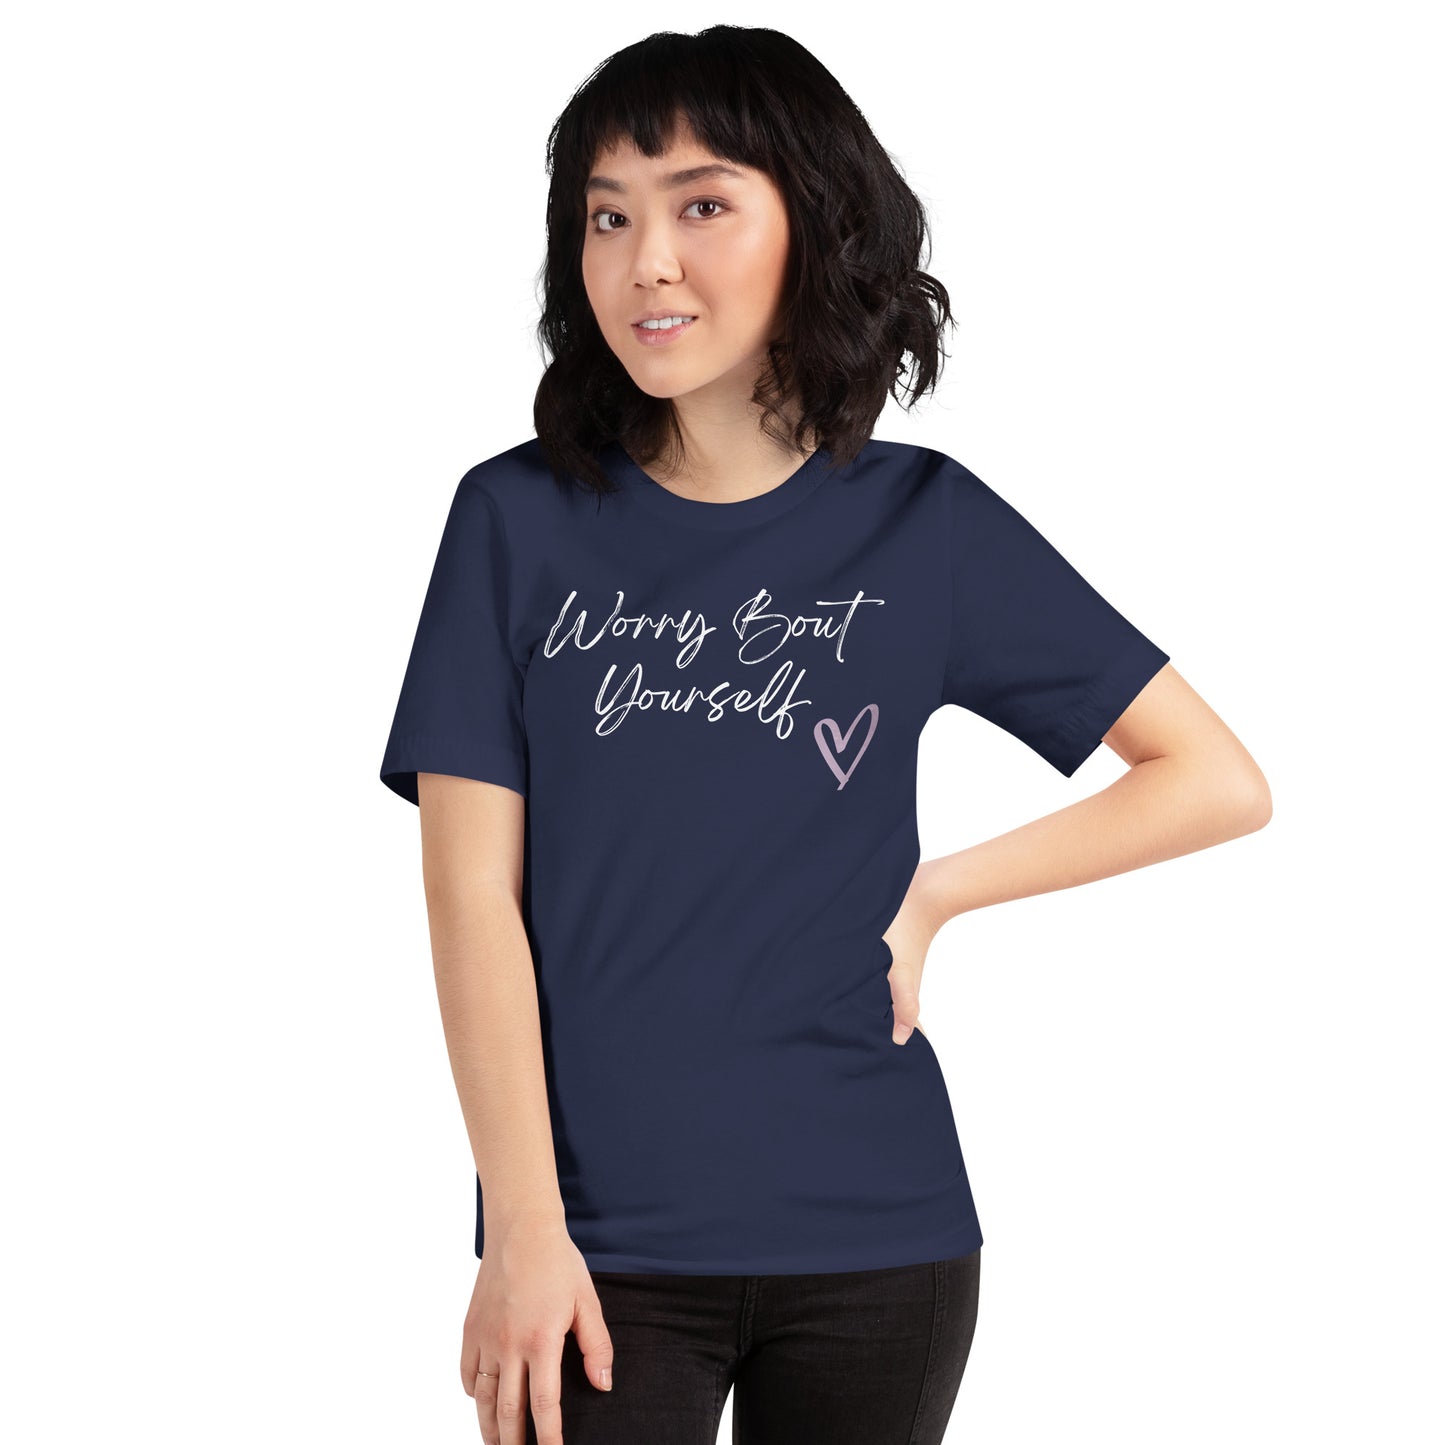 Worry Bout Yourself  T-shirt